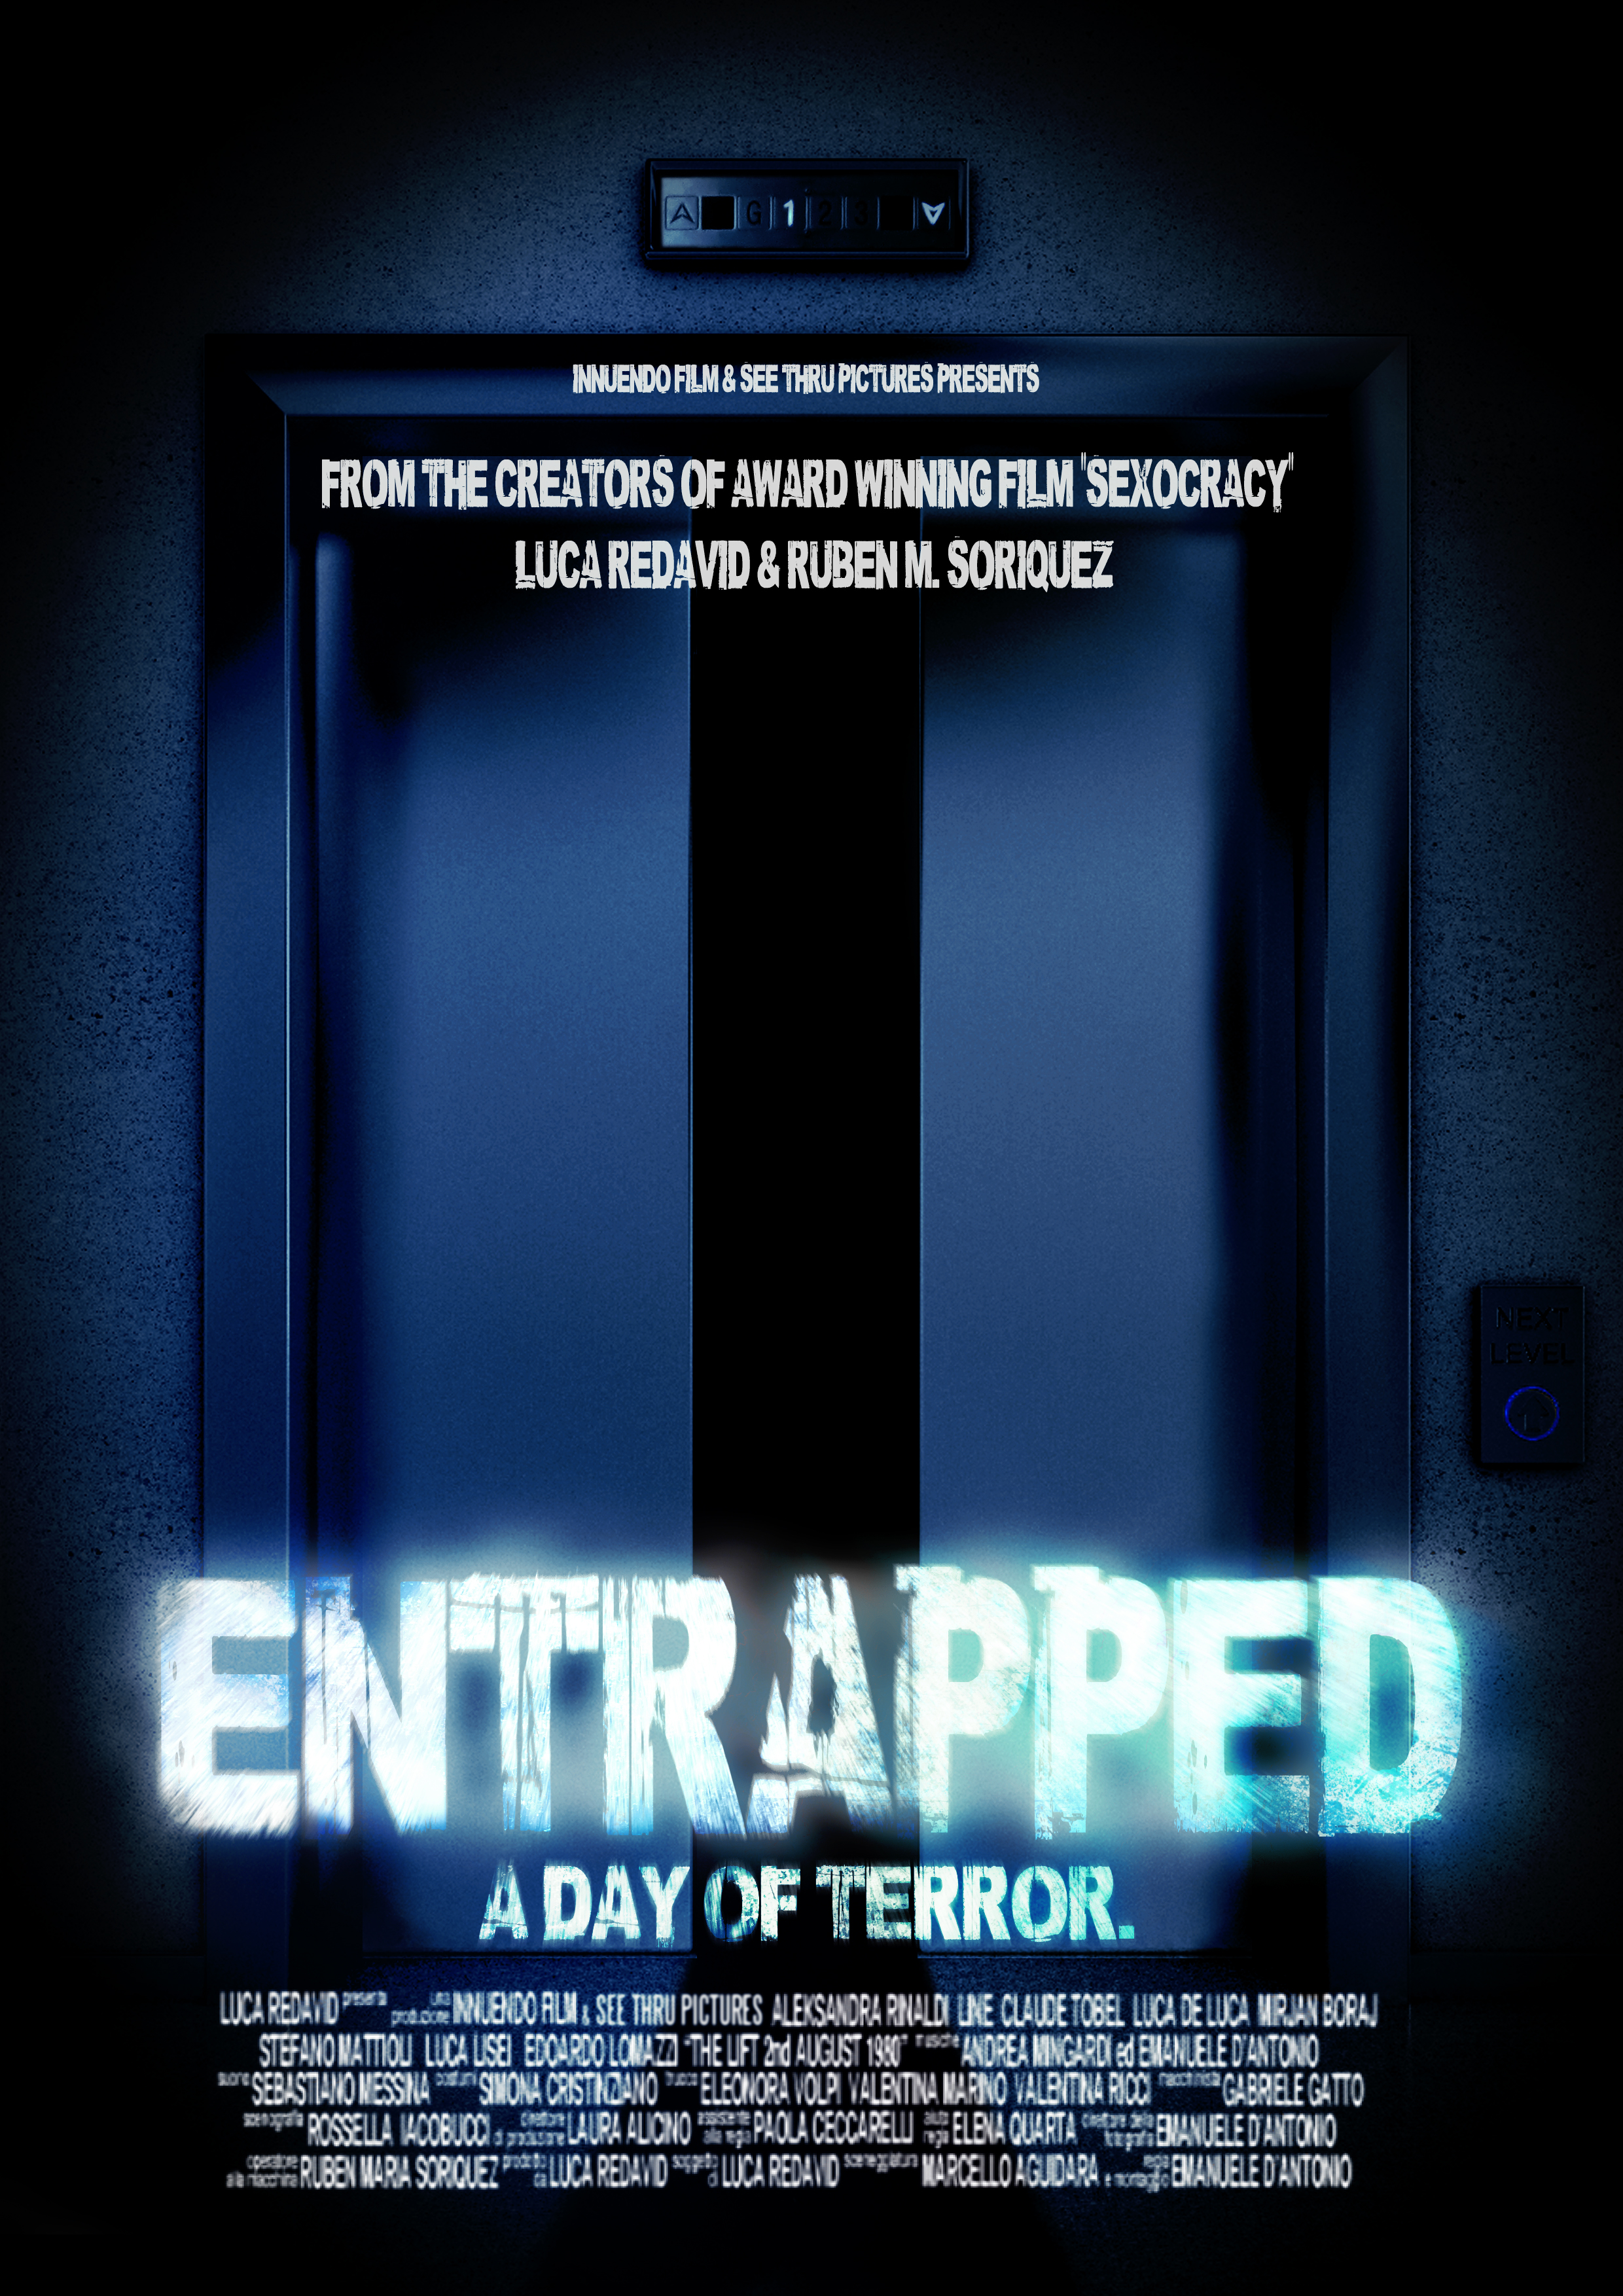 Entrapped: a day of terror (2019)